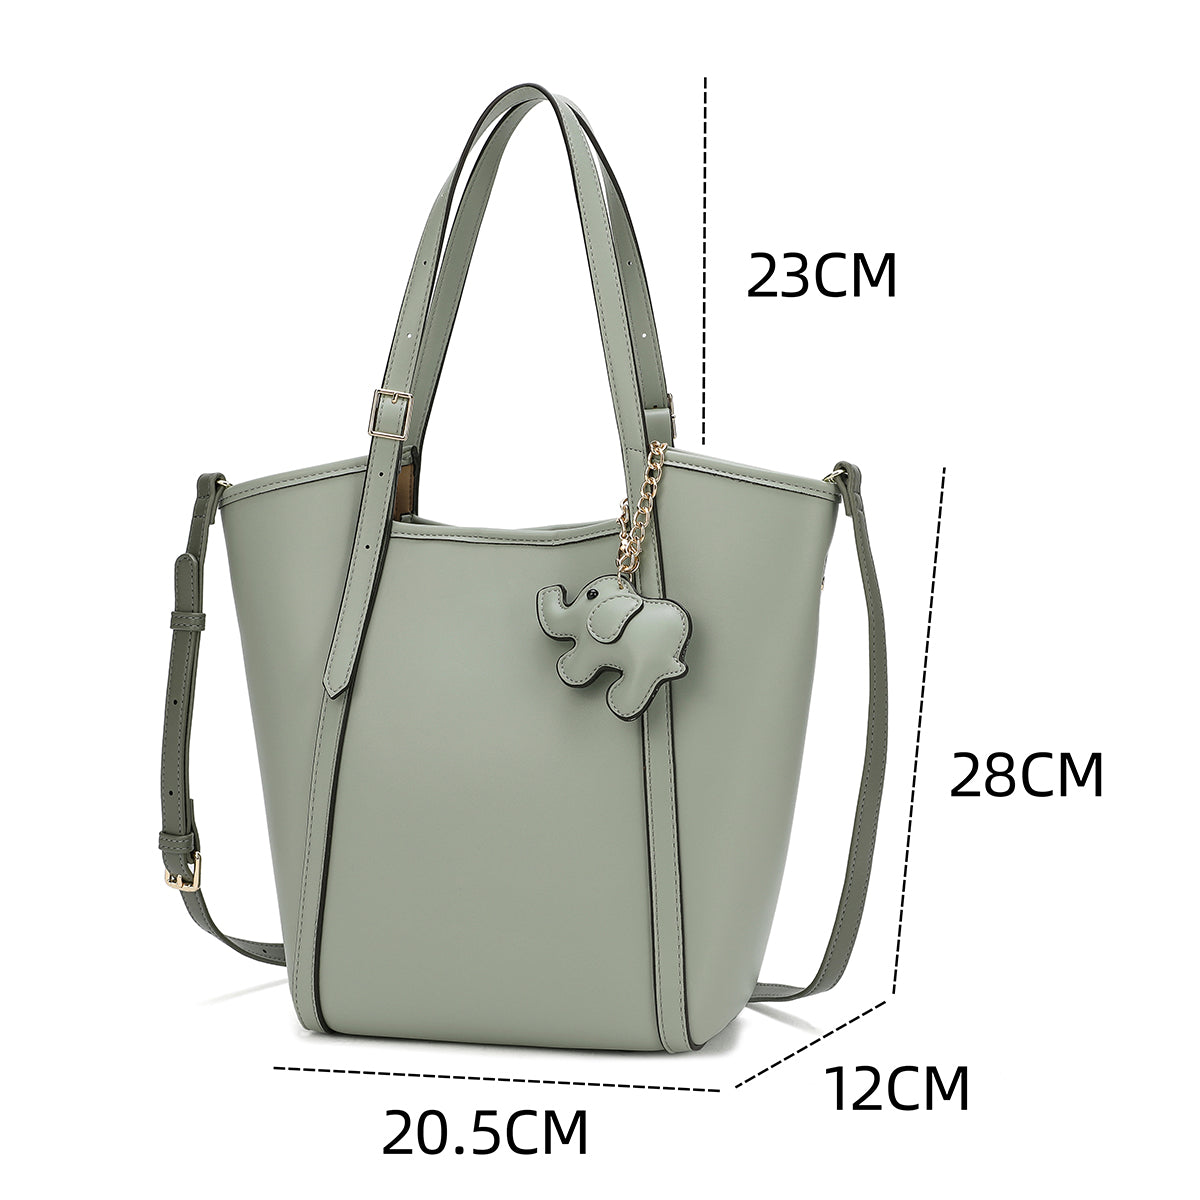 A spacious handbag with a distinctive classic design, available in two colors